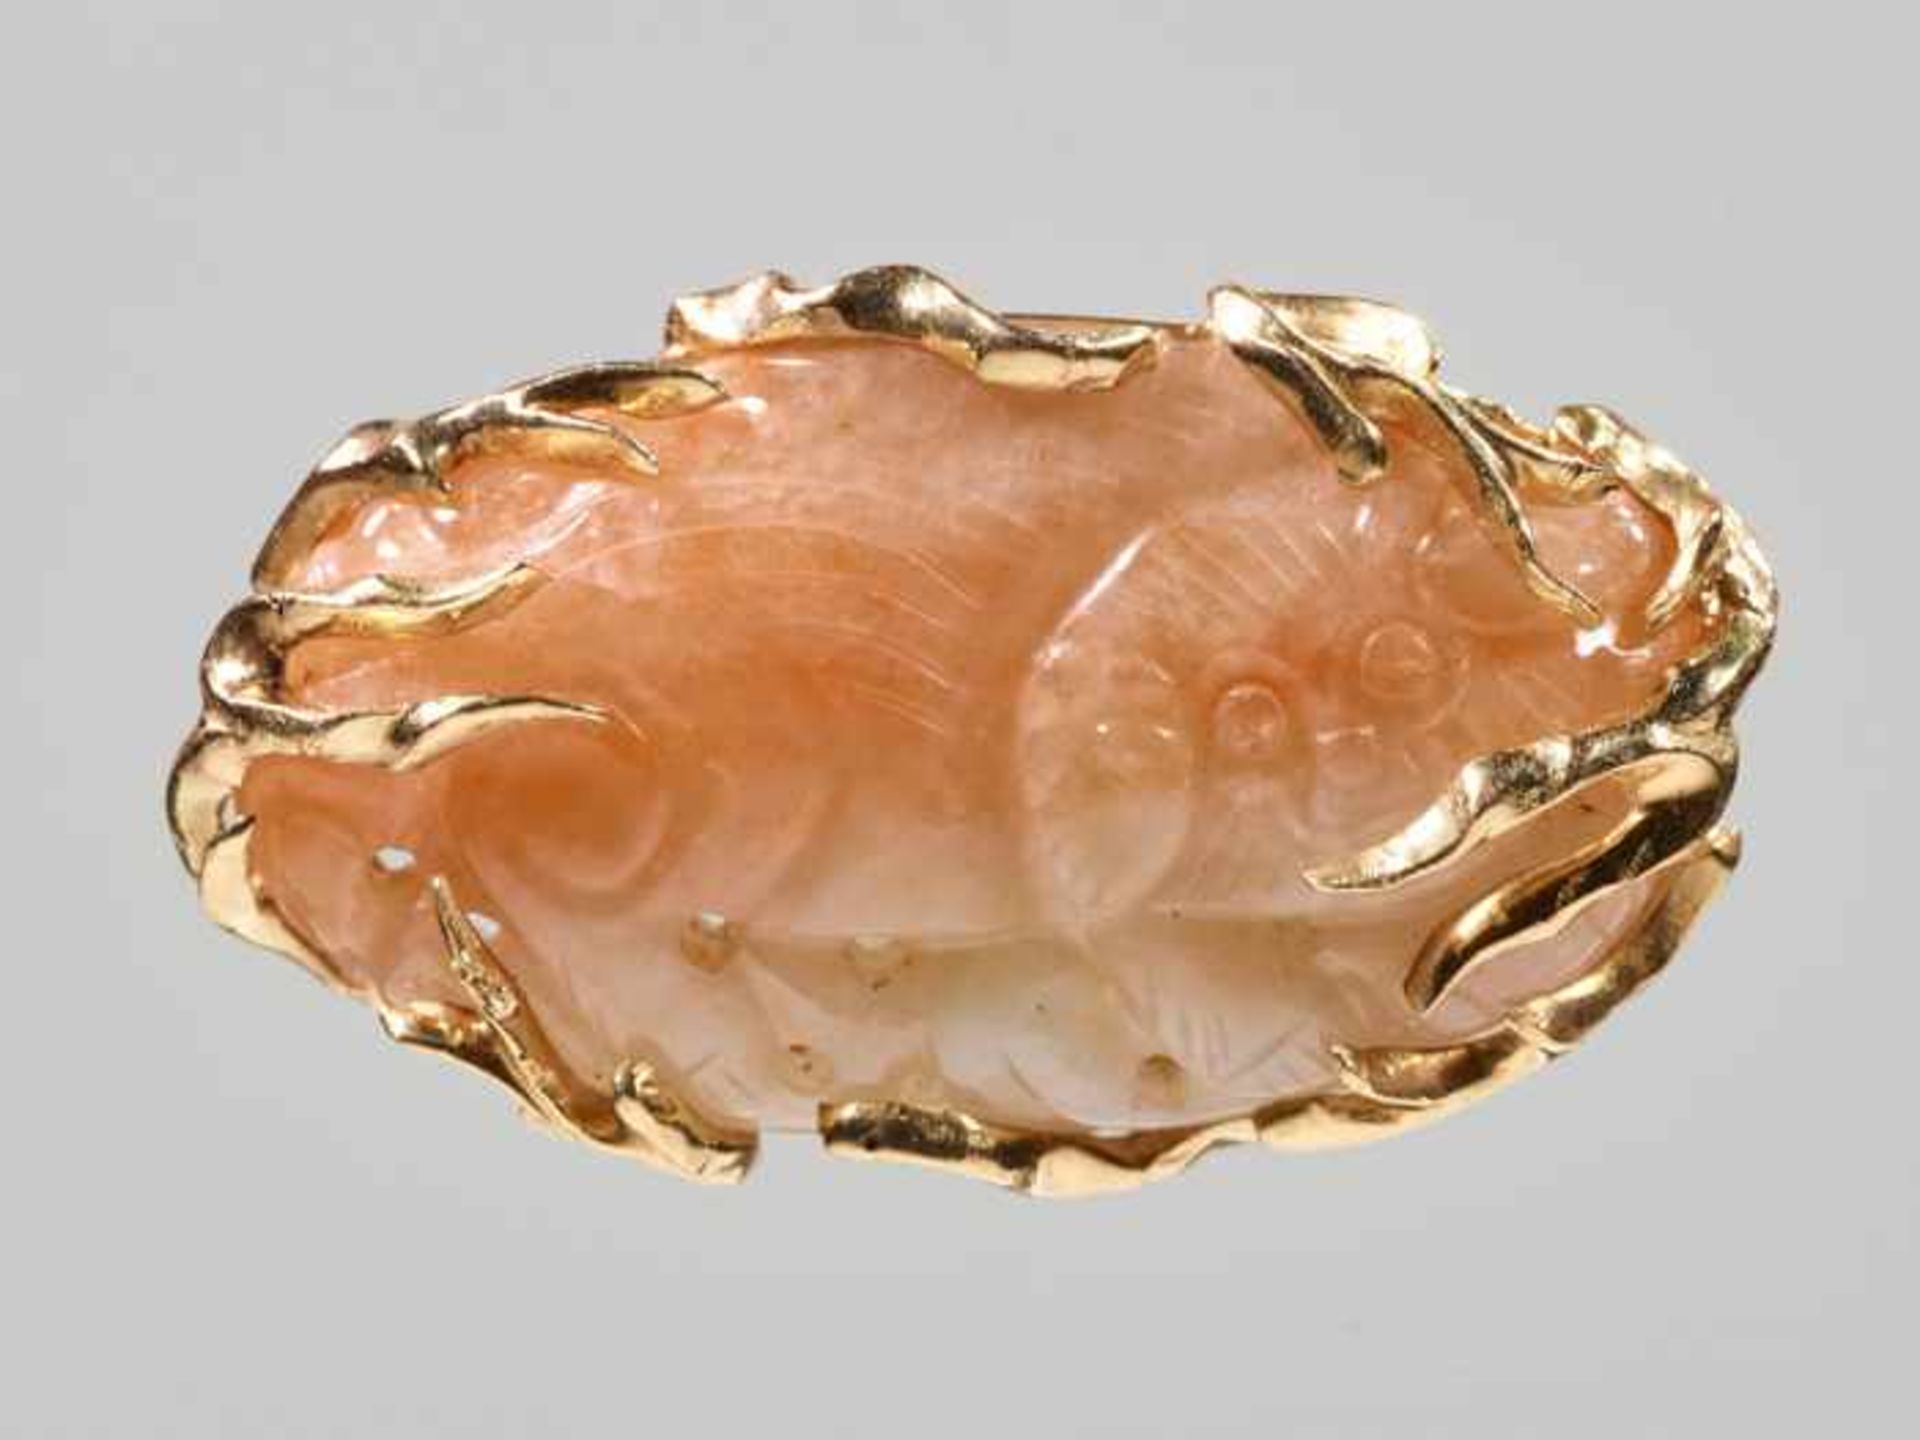 A RUSSET JADE 18 CARAT GOLD MOUNTED ‘TIBETAN DOG’ BROOCH, 20th CENTURY The jade of even russet color